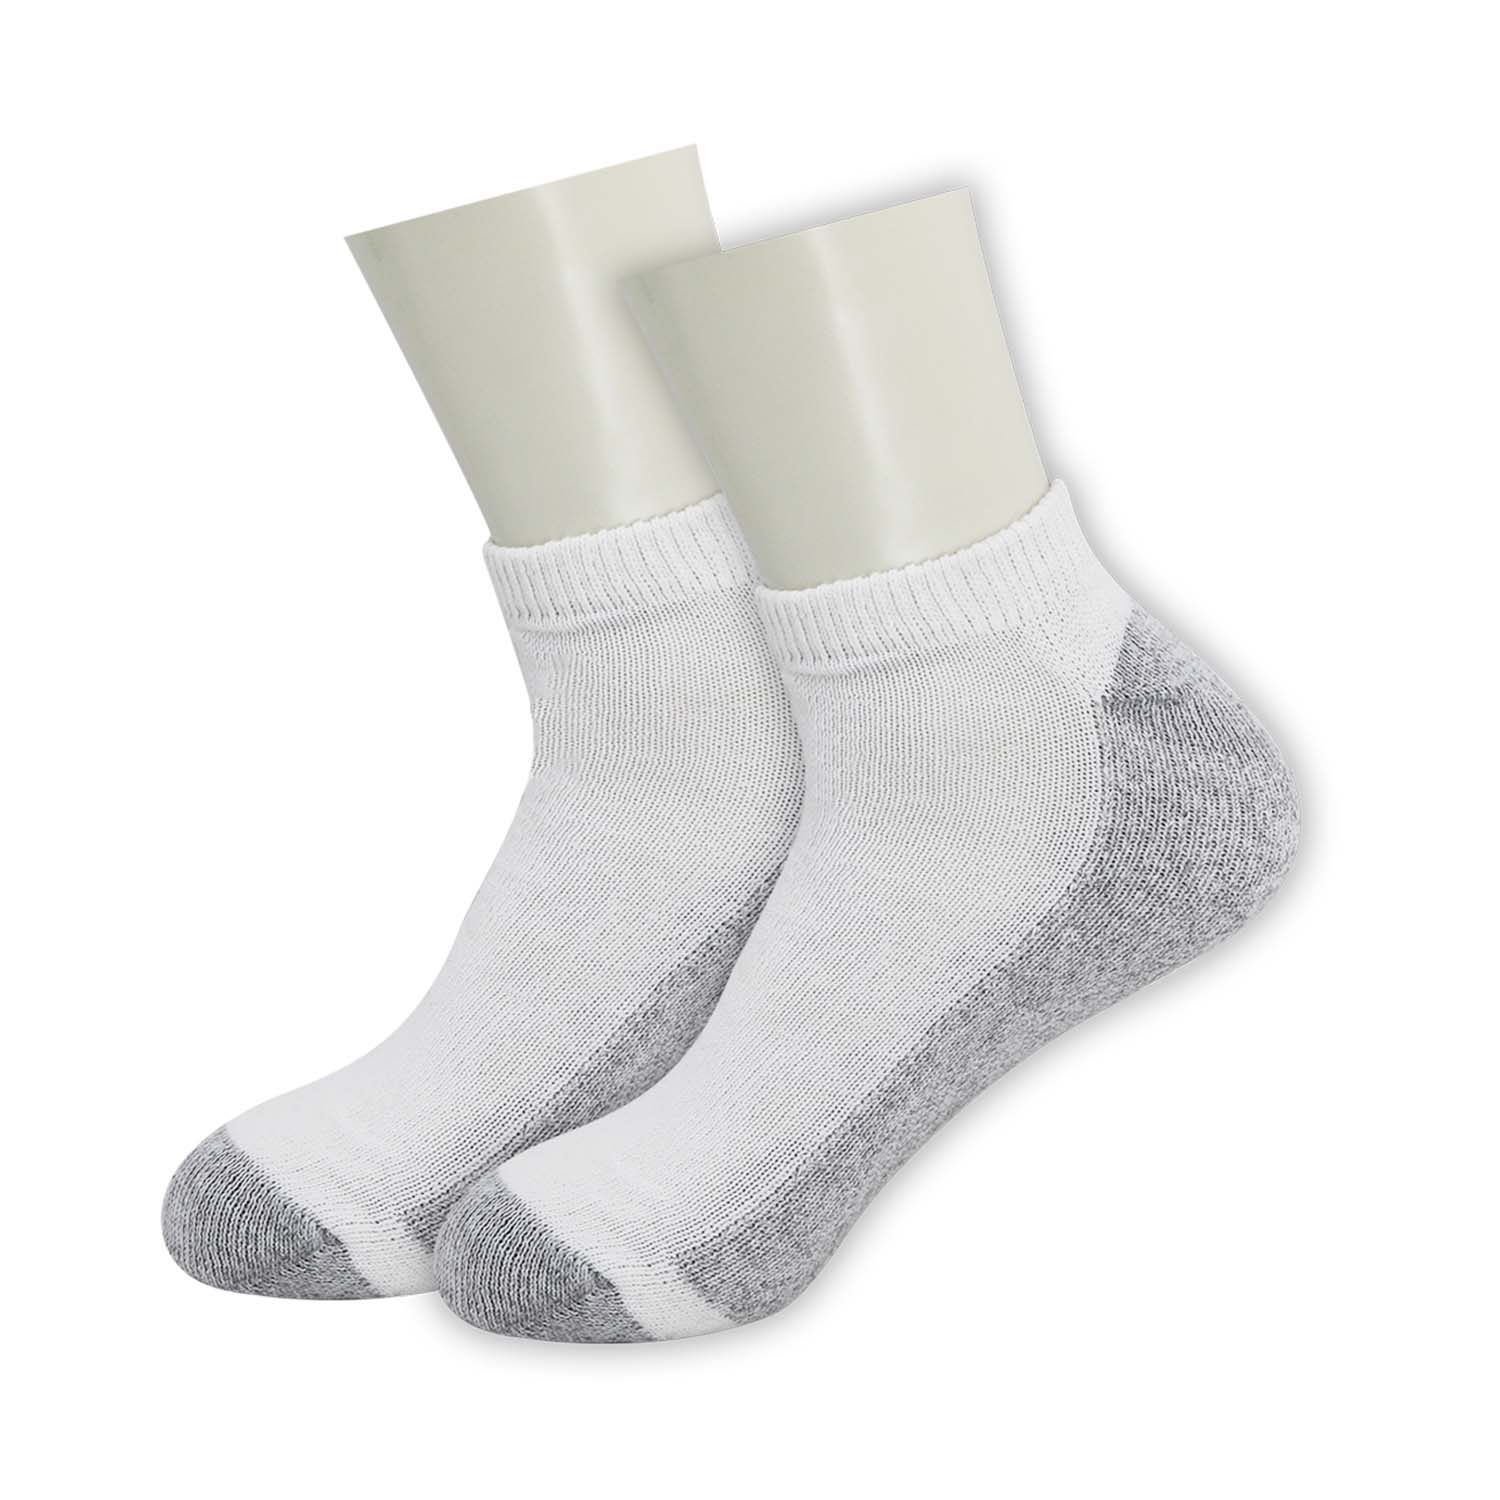 180 Pairs - Low Cut Bulk Socks Athletic Size 10-13 in White with Grey - Wholesale Case of 180 Mens Socks